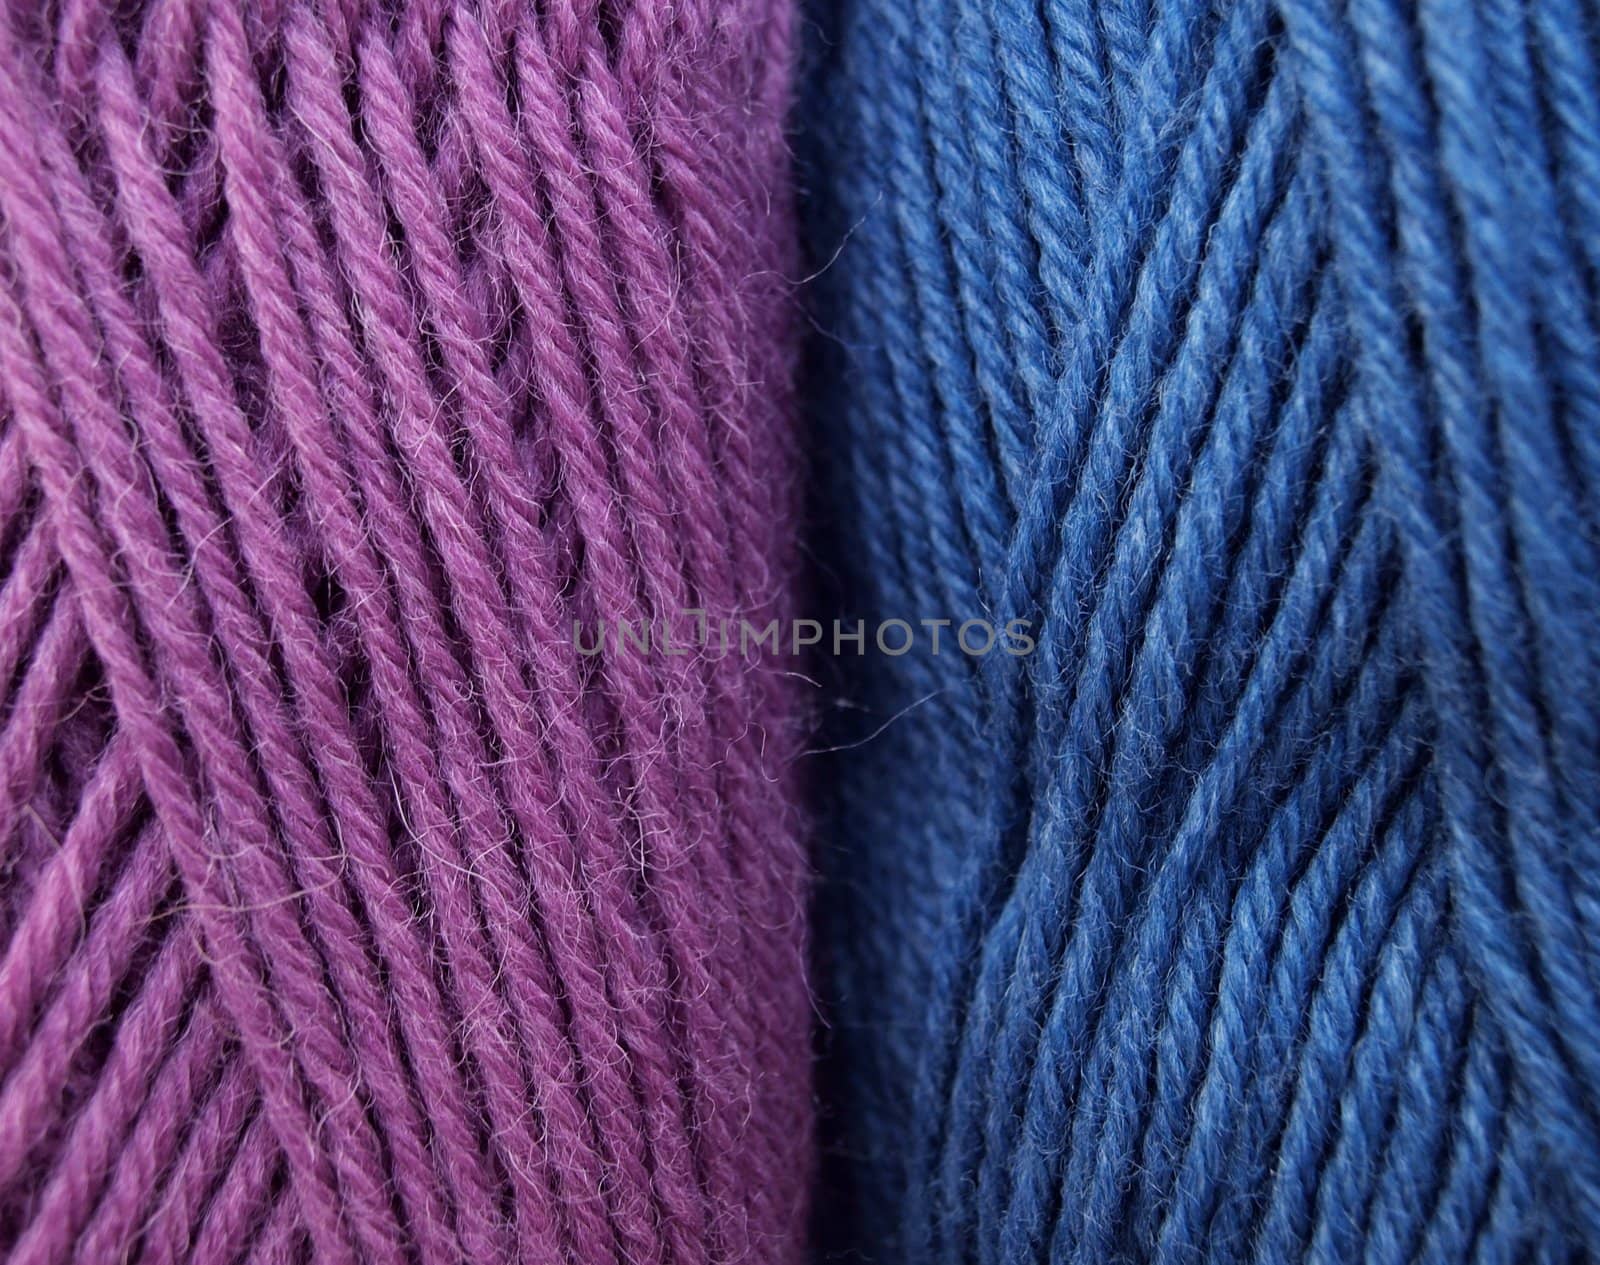 Woolen yarn mix of two colors